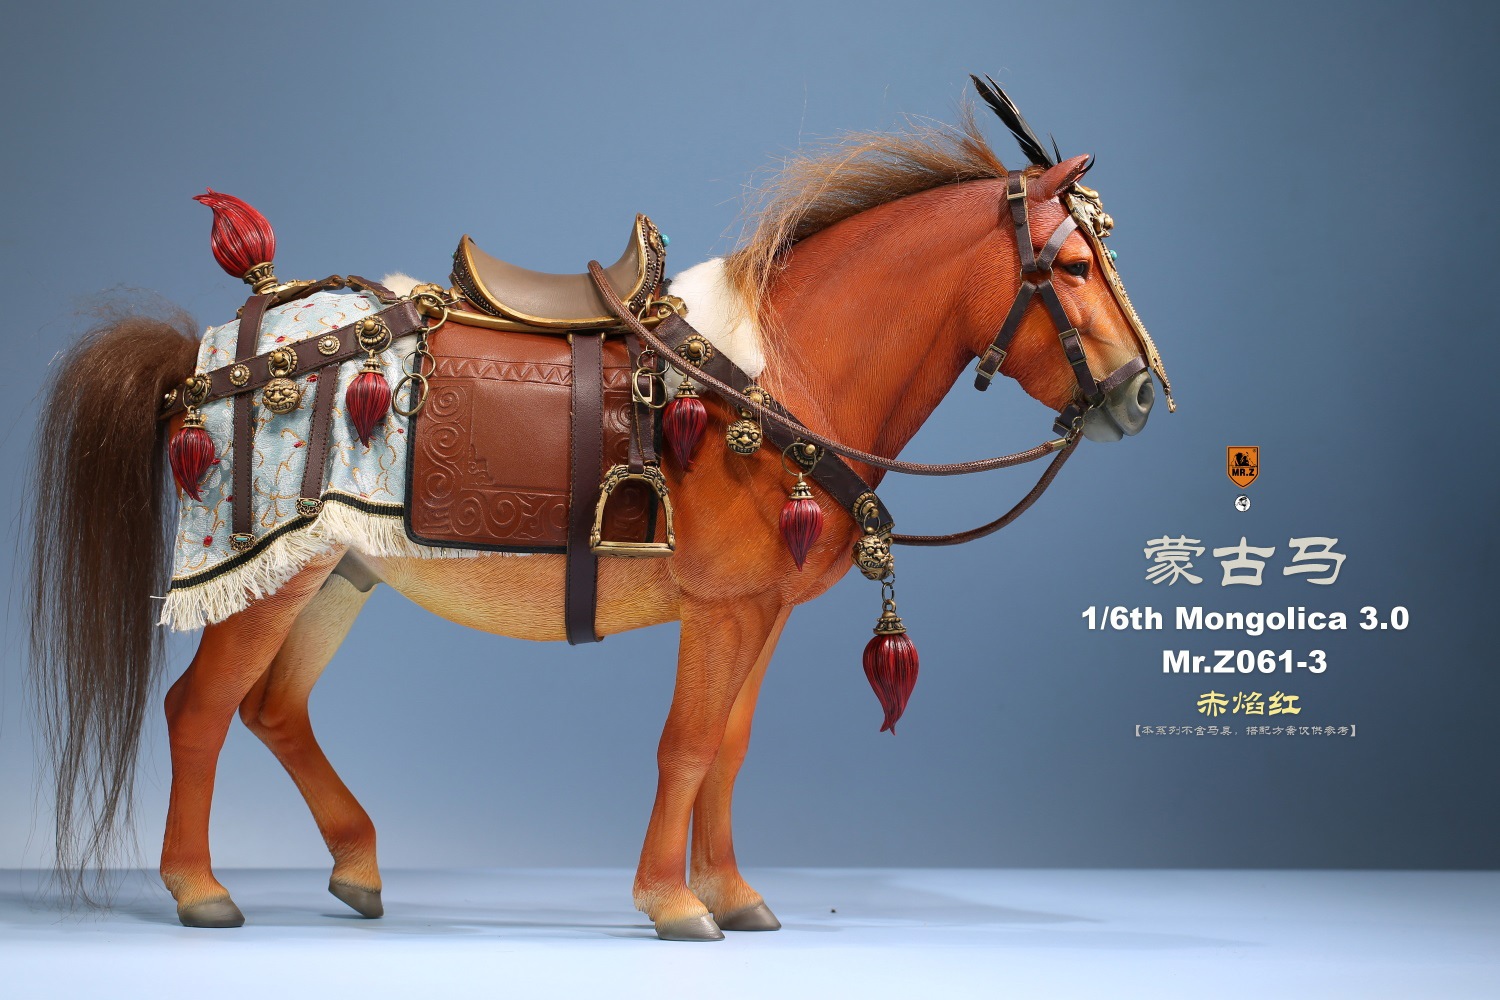 NEW PRODUCT: MR.Z - No. 61 - Mongolian horse set of 8 colors #Z061 & classical harness #DT001-S 3721